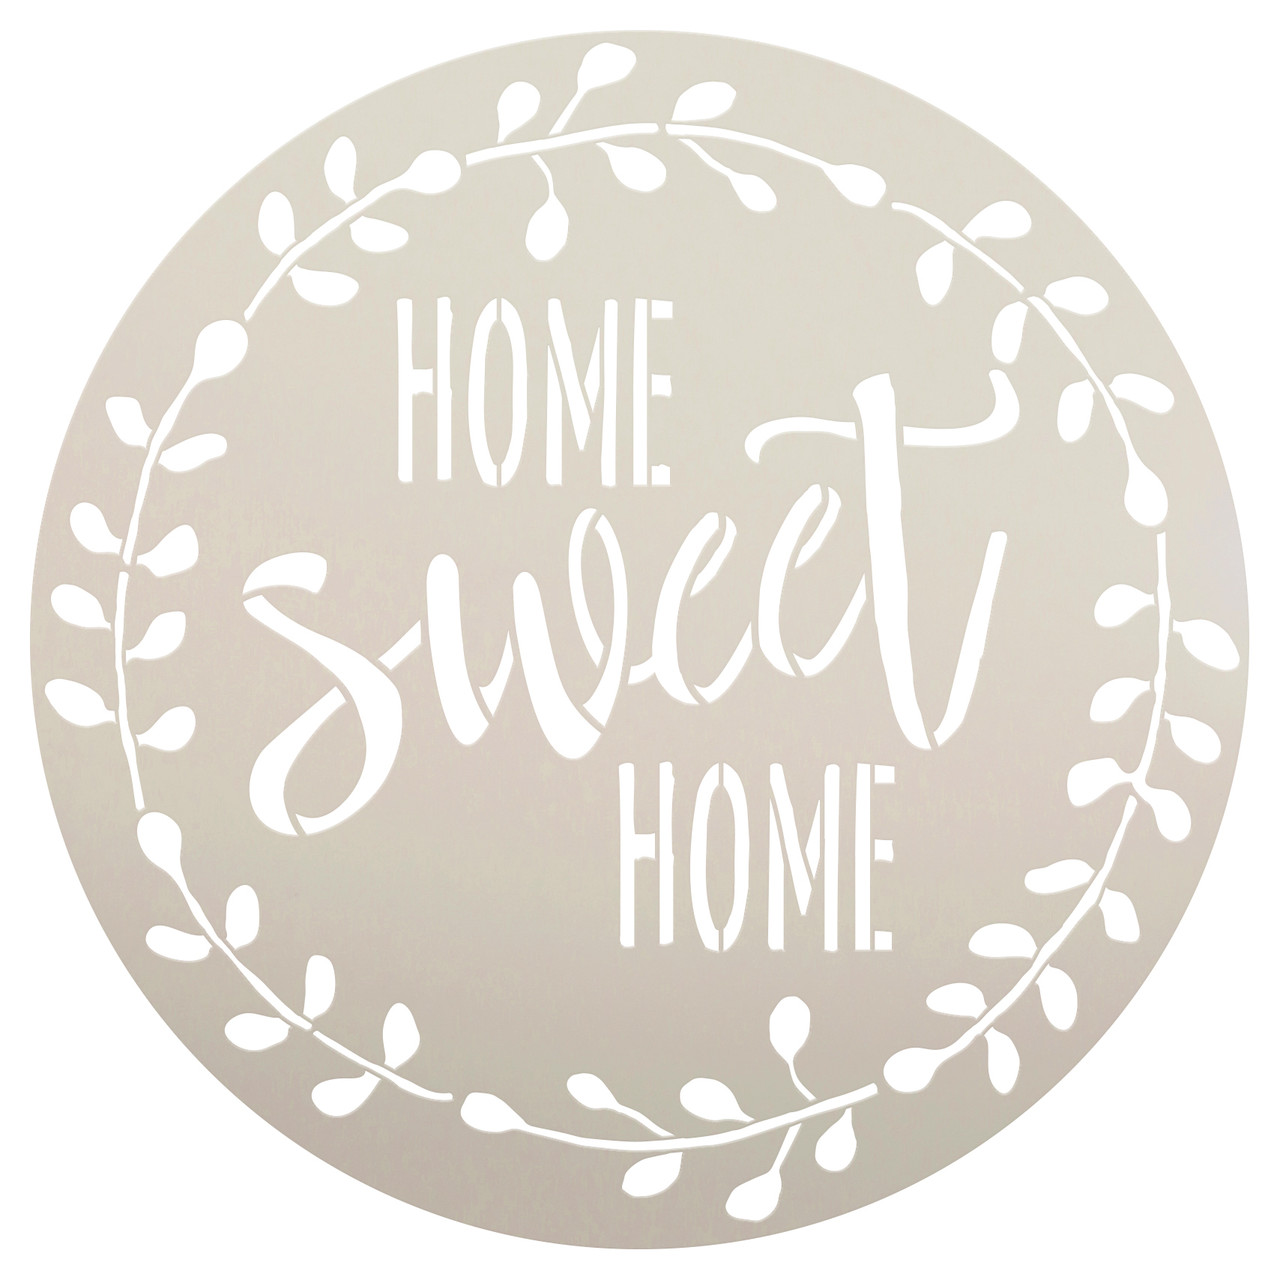 Home Sweet Home Stencil with Laurel Wreath by StudioR12 | Reusable Mylar Template for Painting Wood Signs | Round Design | DIY Home Decor Country Farmhouse Style | 14" Round | Medium